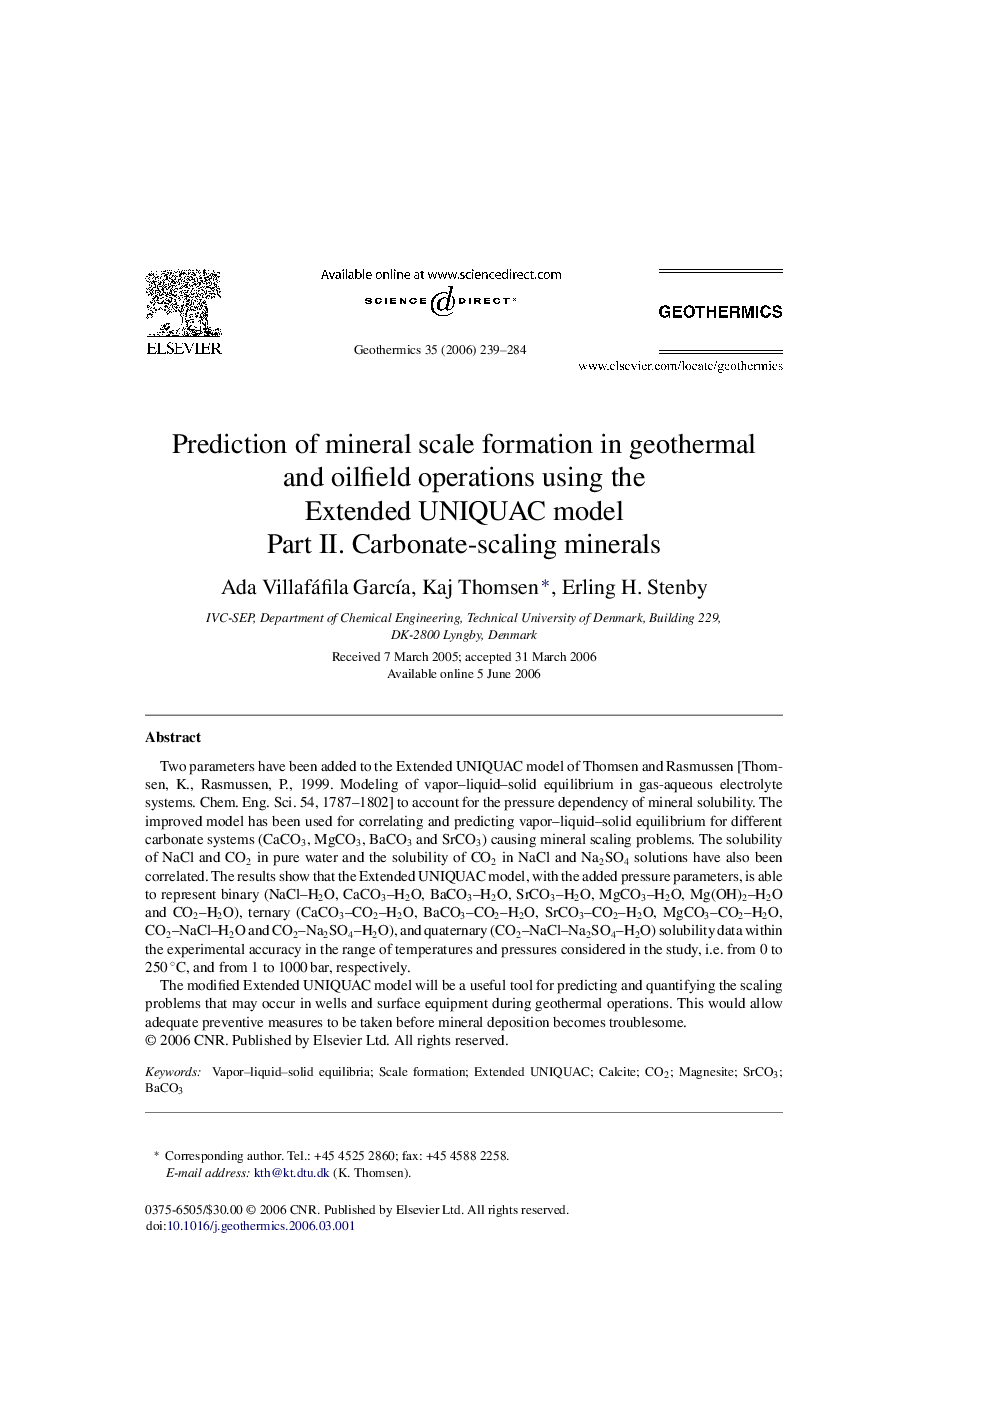 Prediction of mineral scale formation in geothermal and oilfield operations using the Extended UNIQUAC model: Part II. Carbonate-scaling minerals